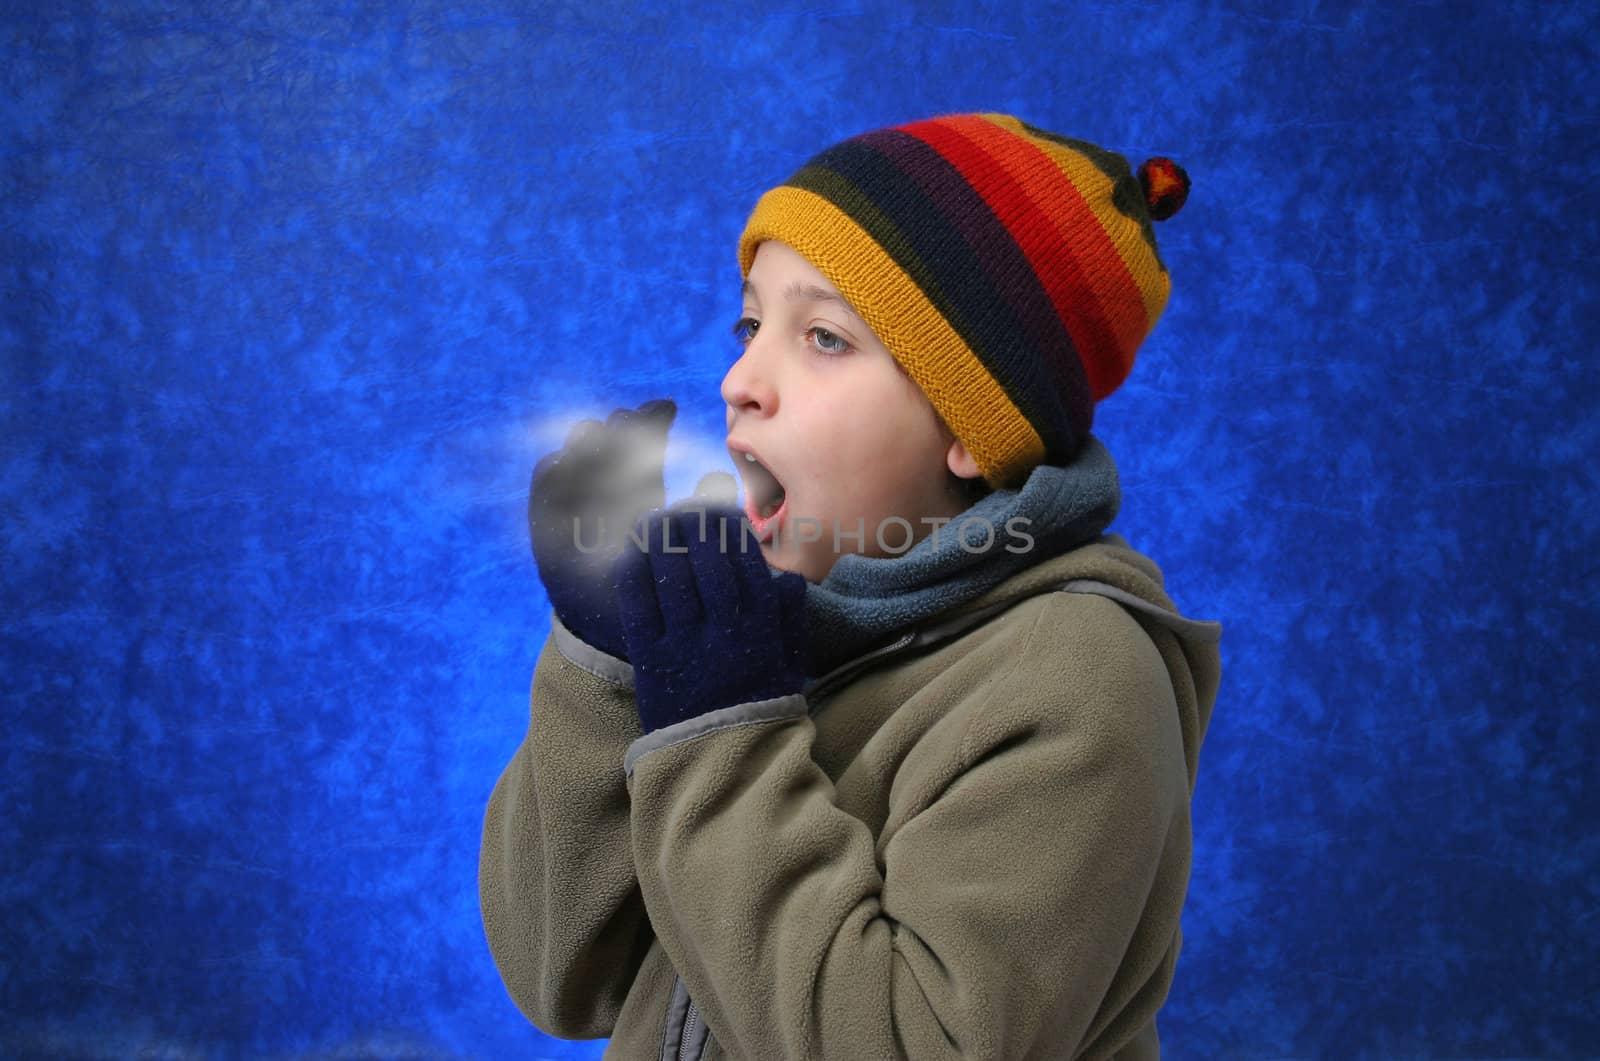 Child trying to warm his hands with his breath in winter outfit. Look at my gallery for more winter images